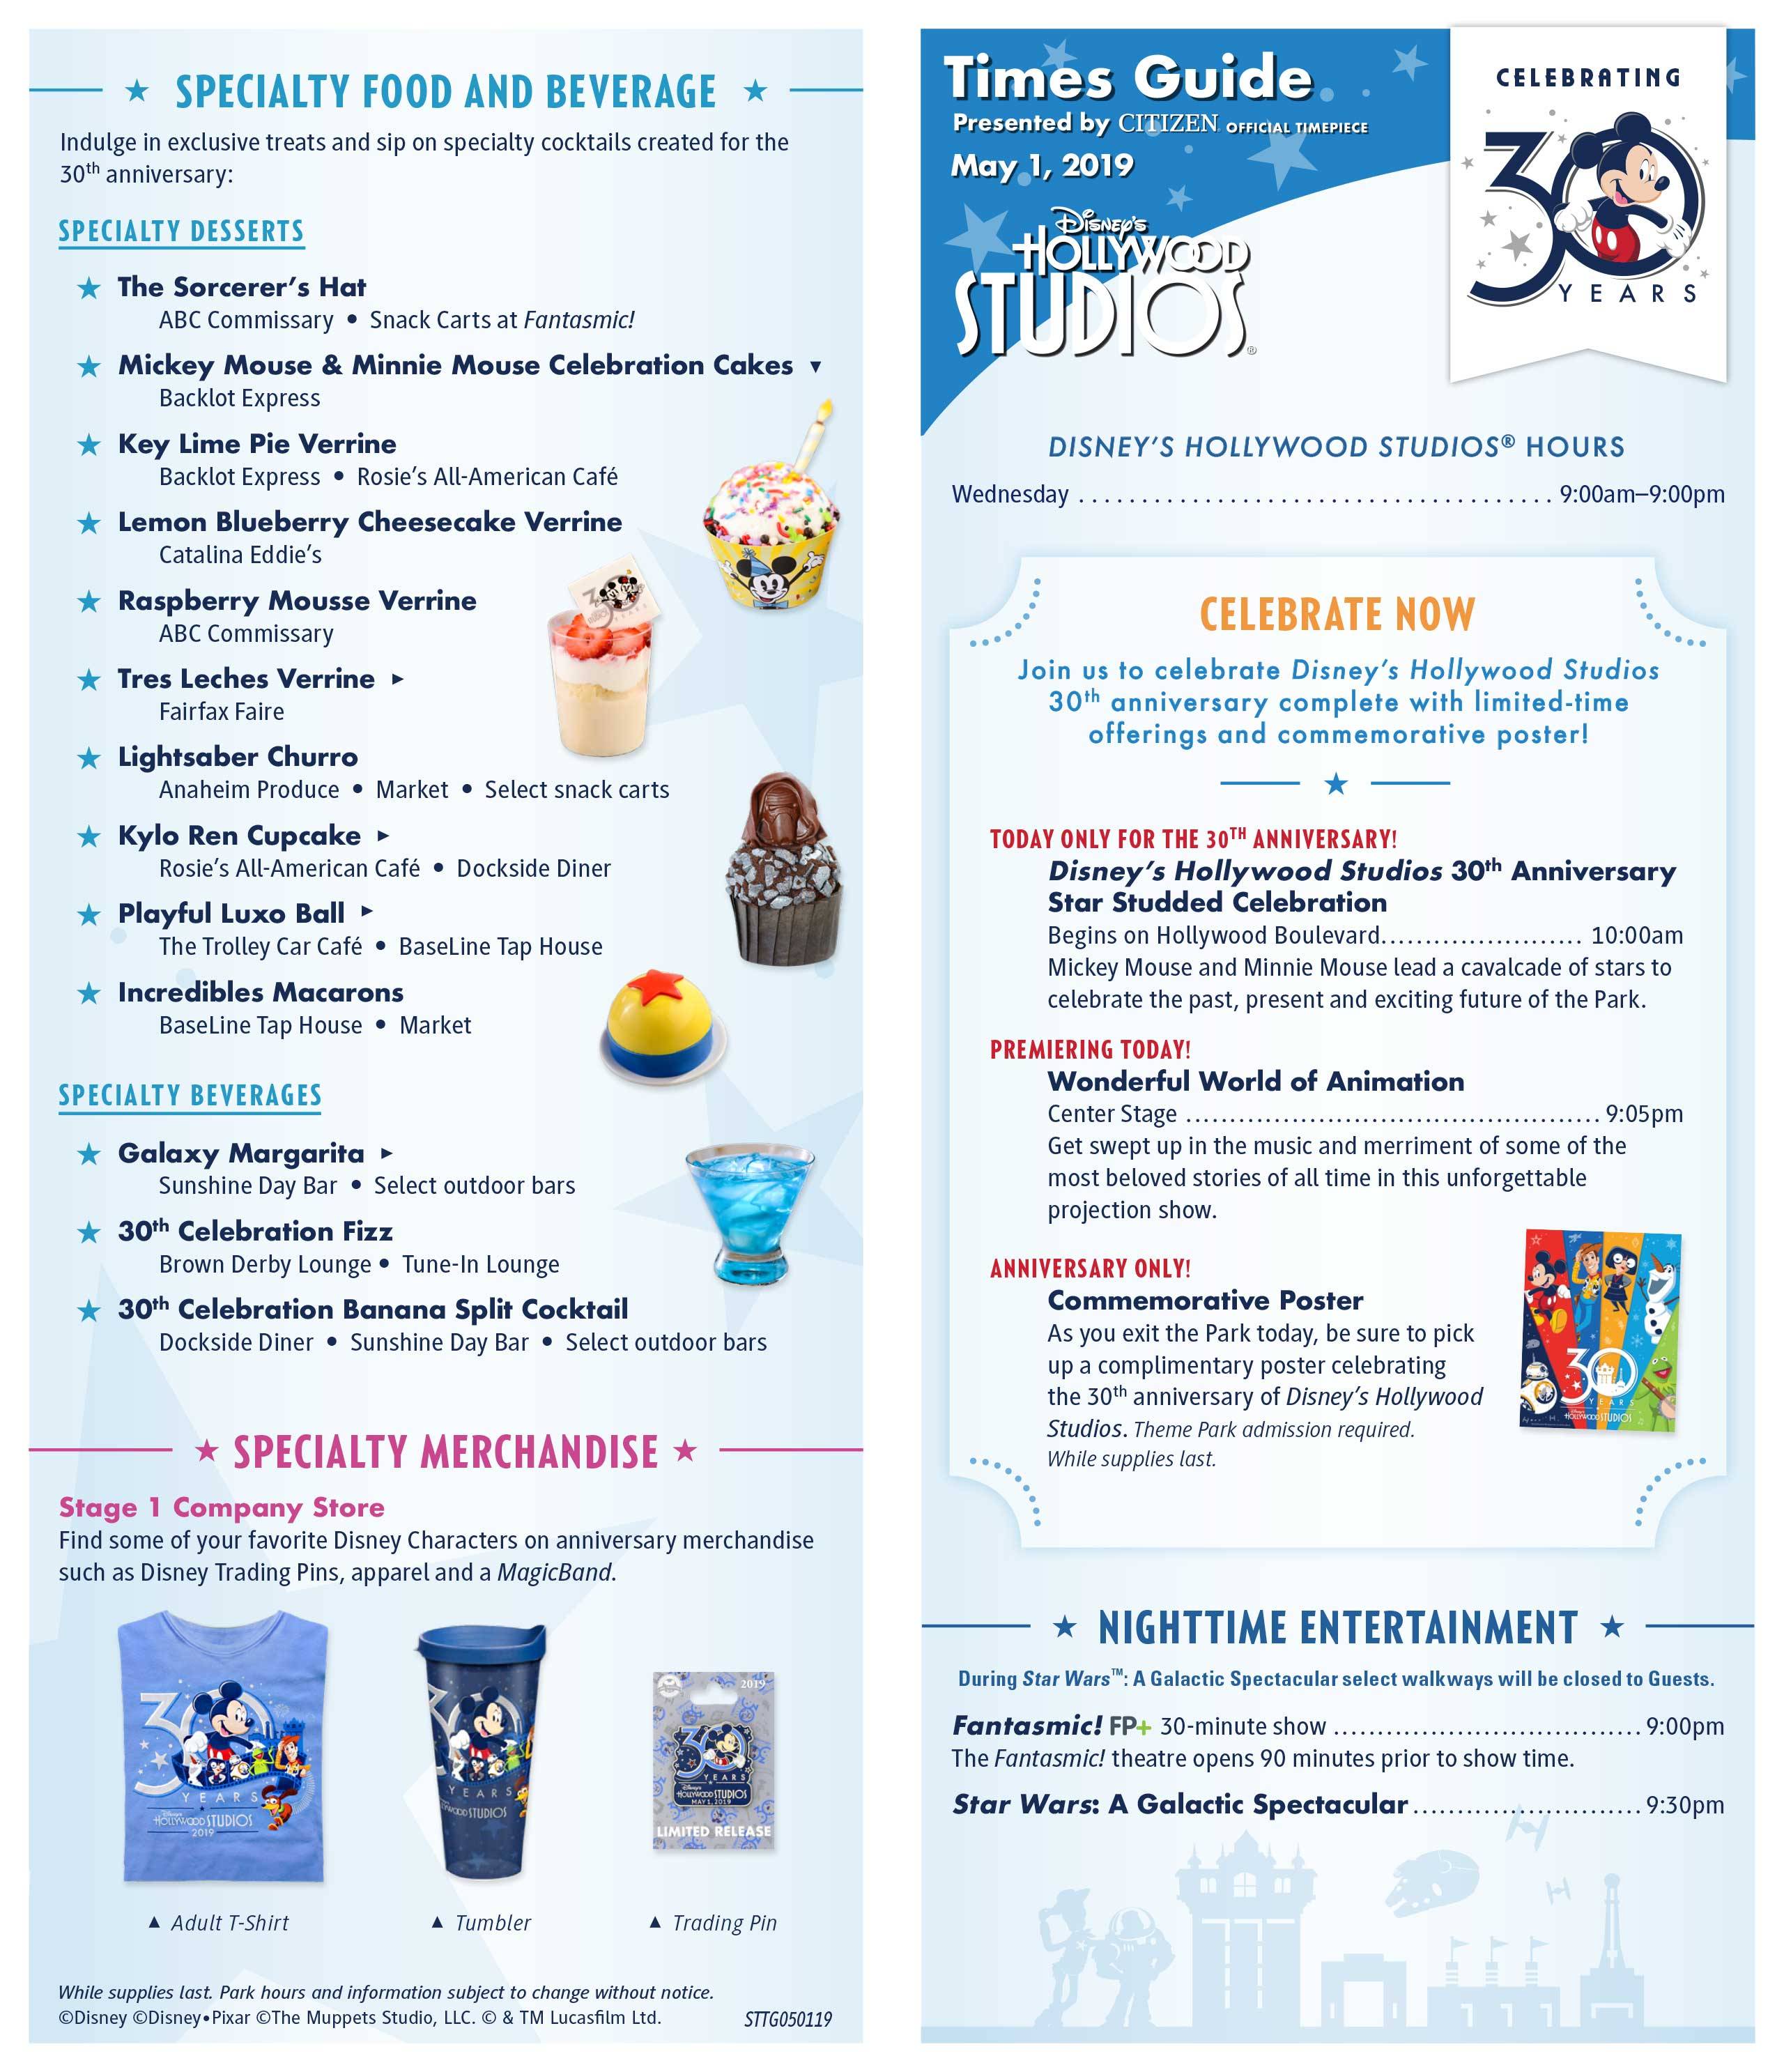 Disney's Hollywood Studios 30th Anniversary times guide